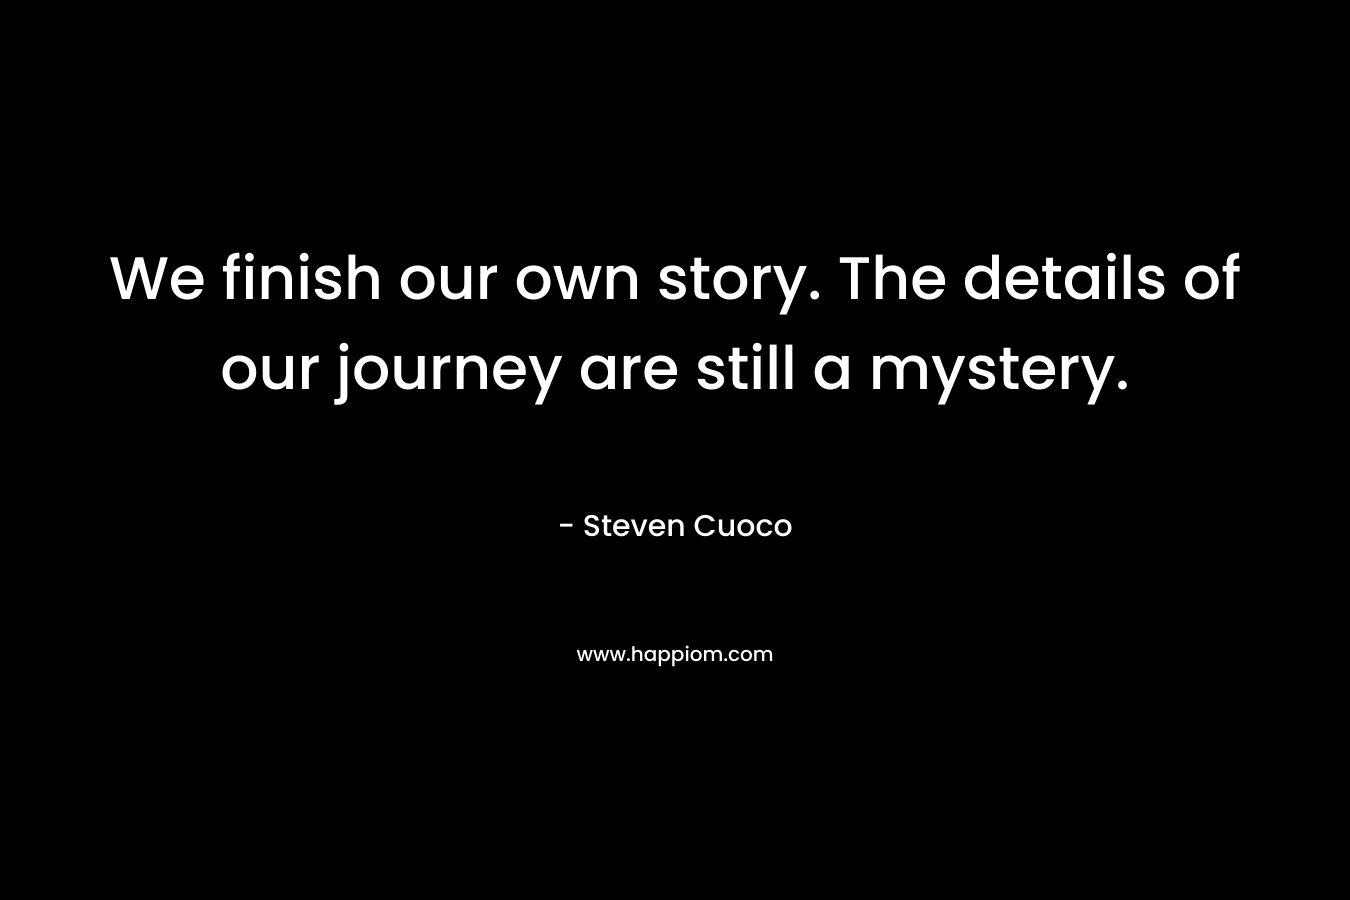 We finish our own story. The details of our journey are still a mystery.